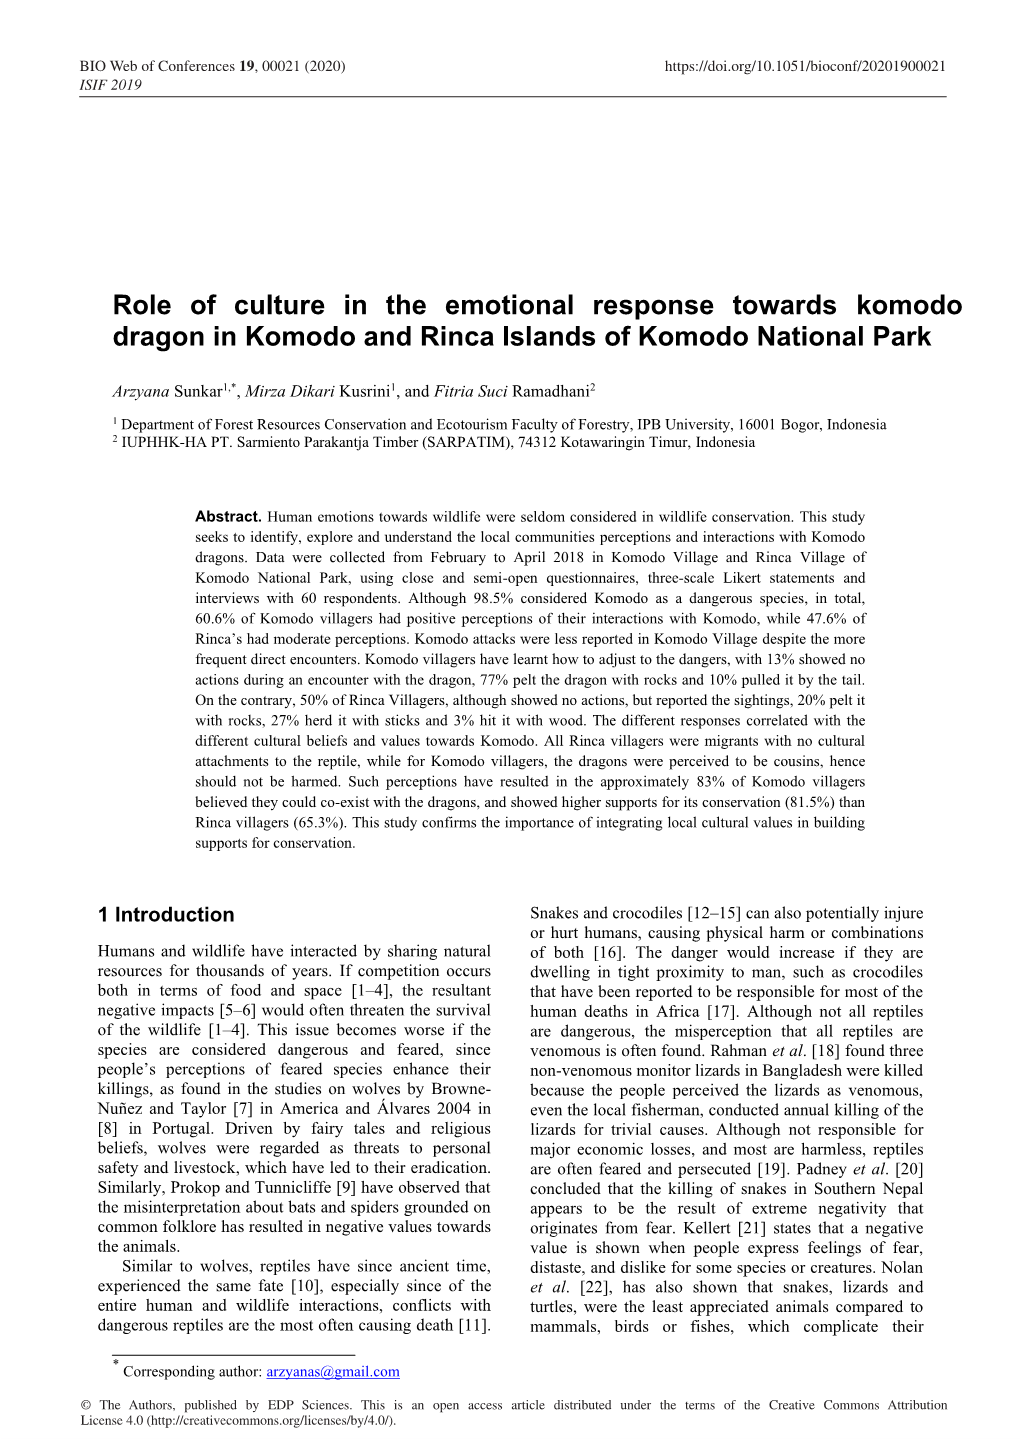 Role of Culture in the Emotional Response Towards Komodo Dragon in Komodo and Rinca Islands of Komodo National Park